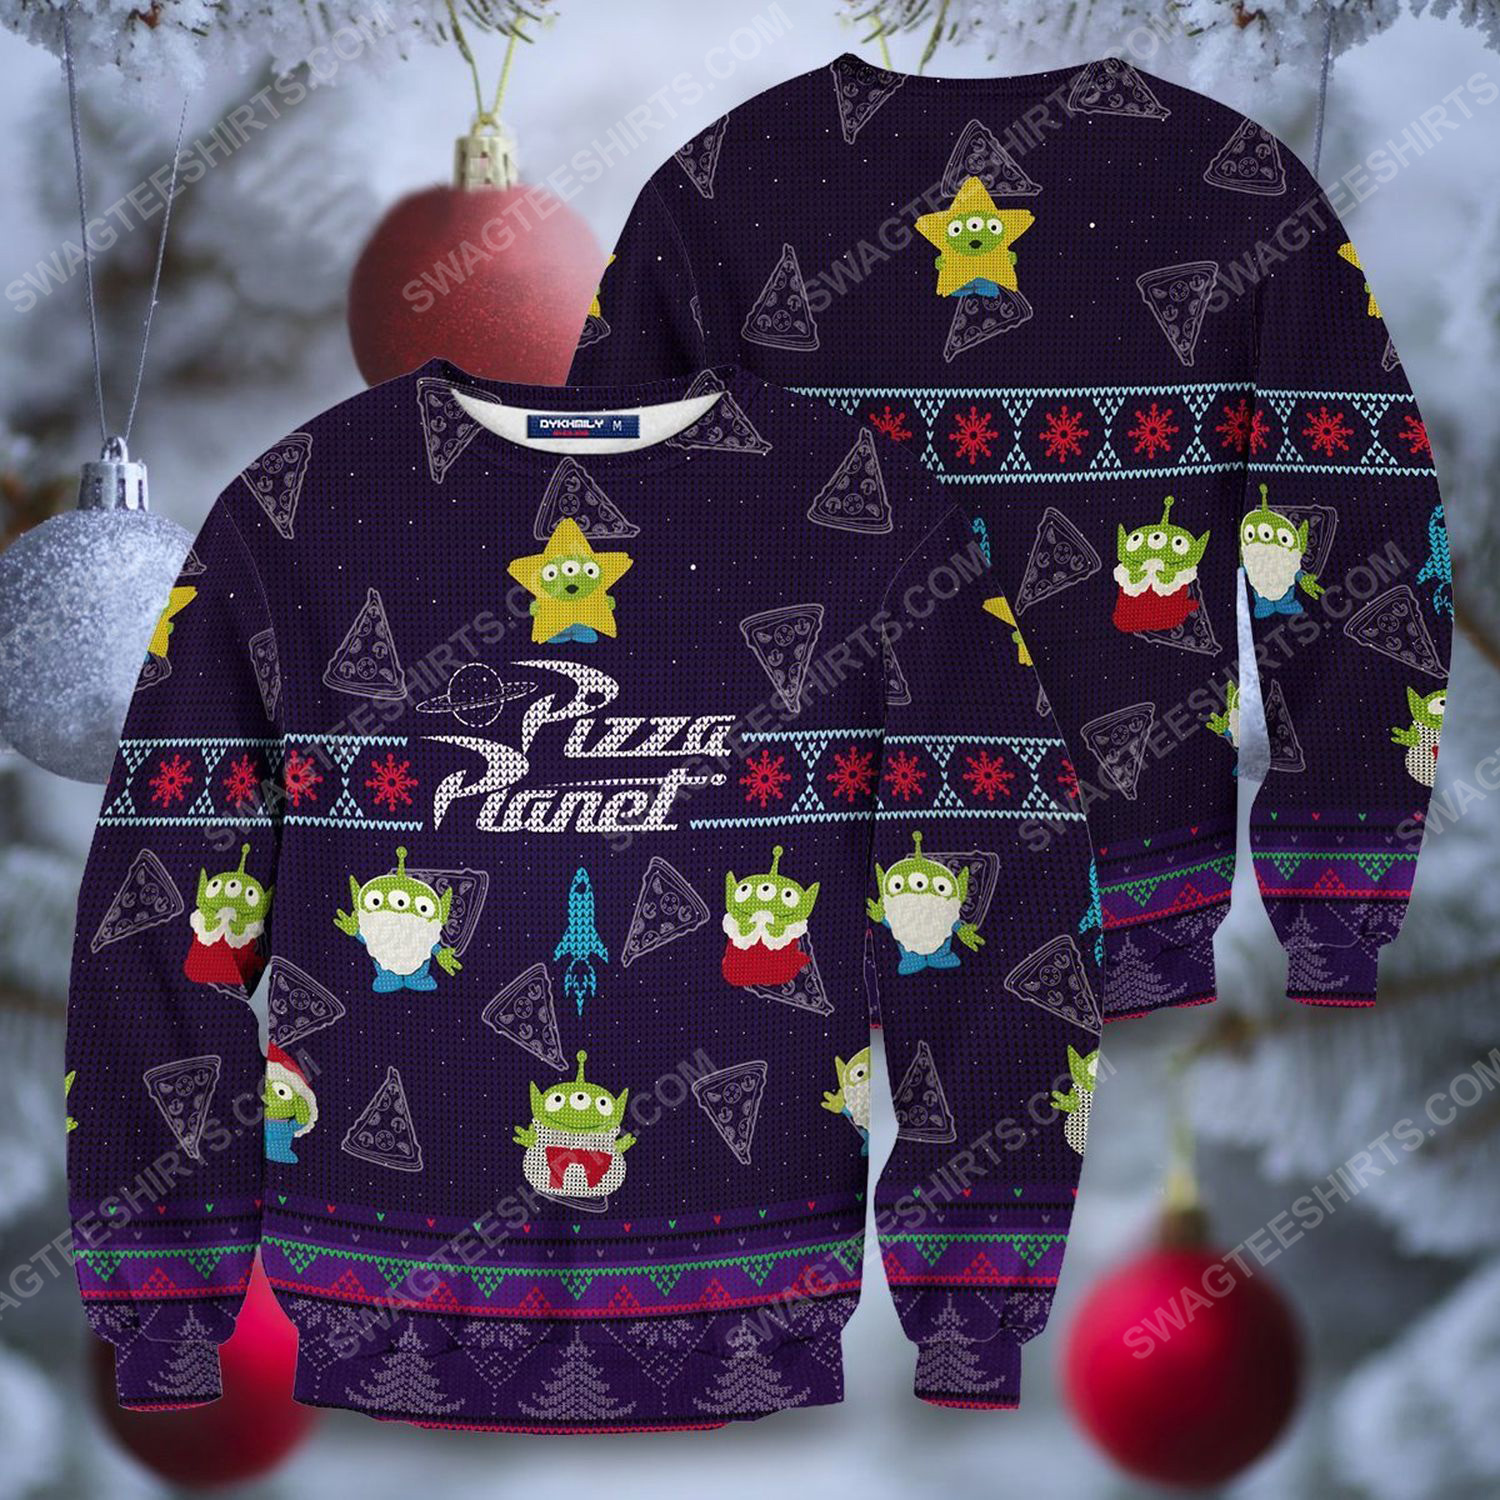 Pizza planet full print ugly christmas sweater 2